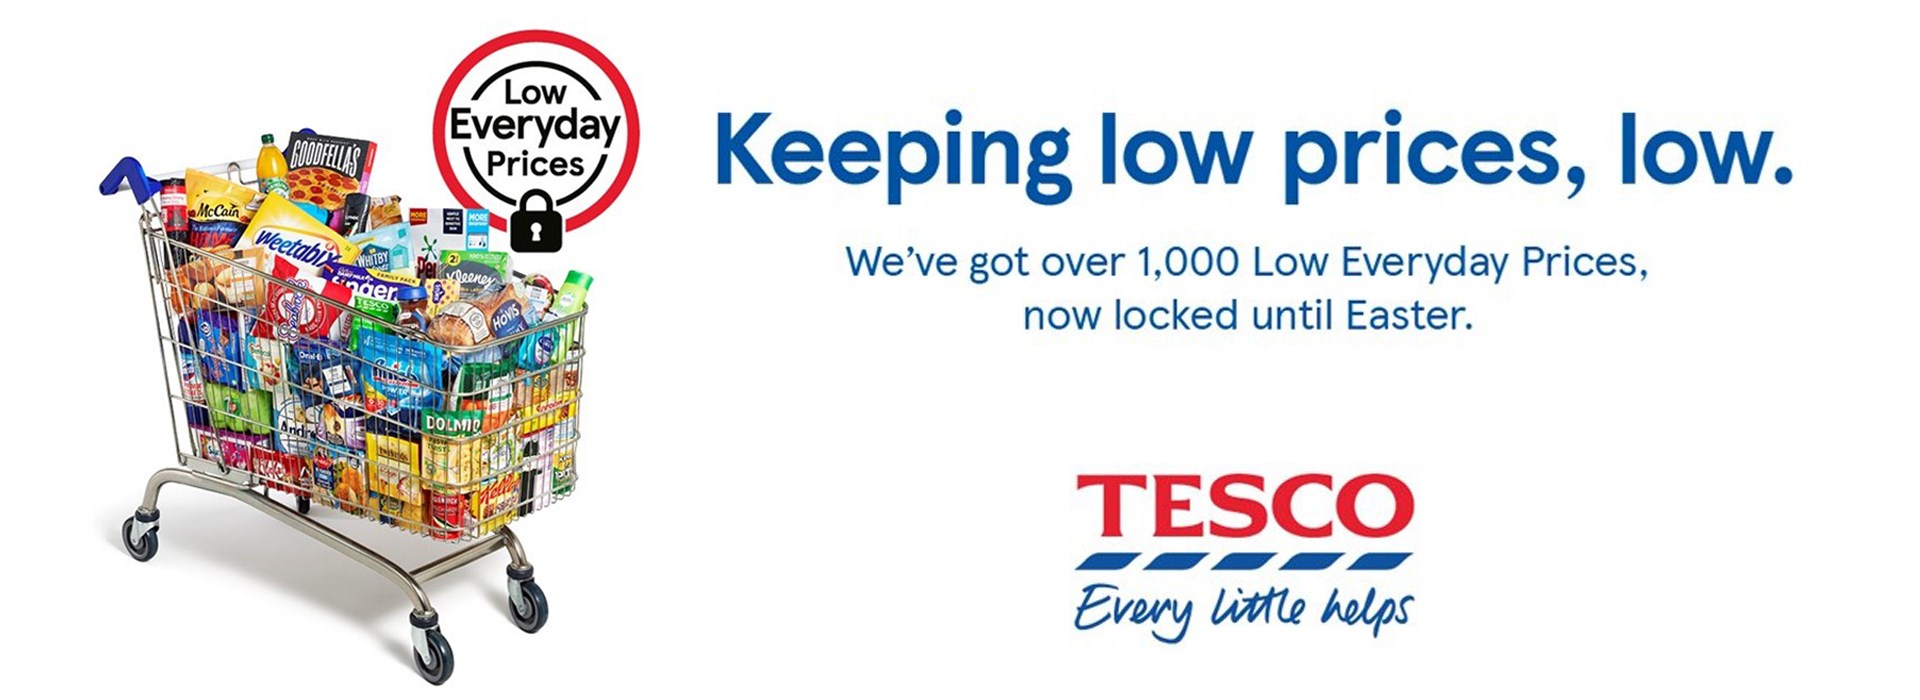 Tesco is one of many retailers that have introduced a price lock in January